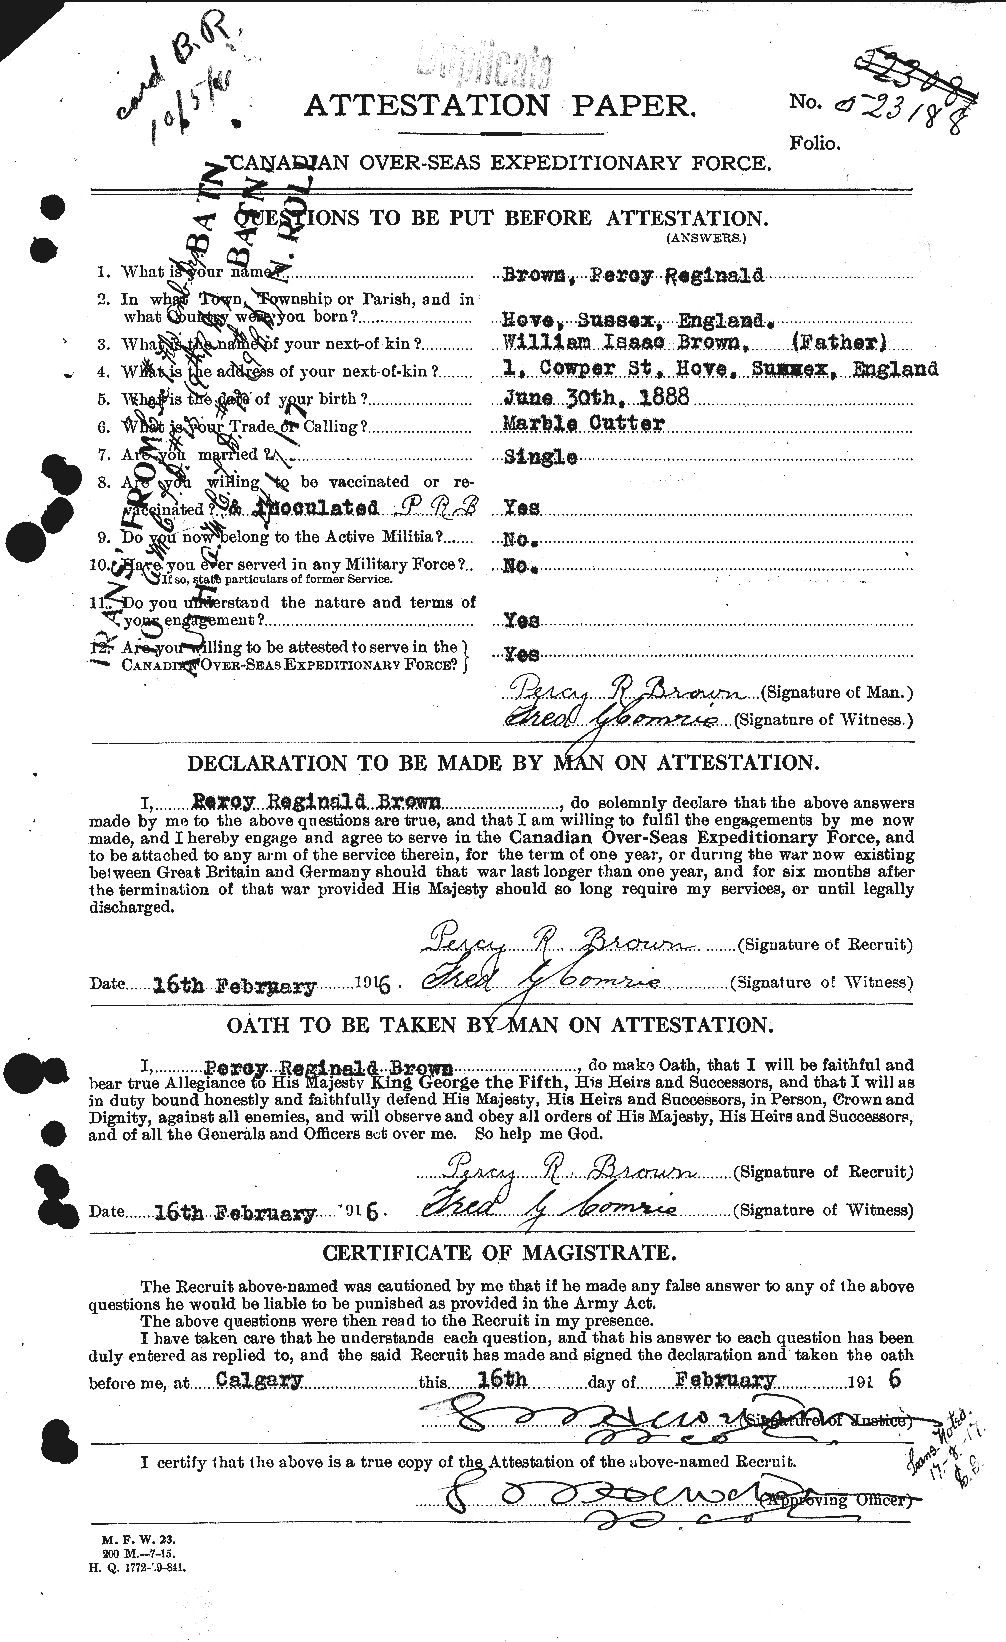 Personnel Records of the First World War - CEF 267177a